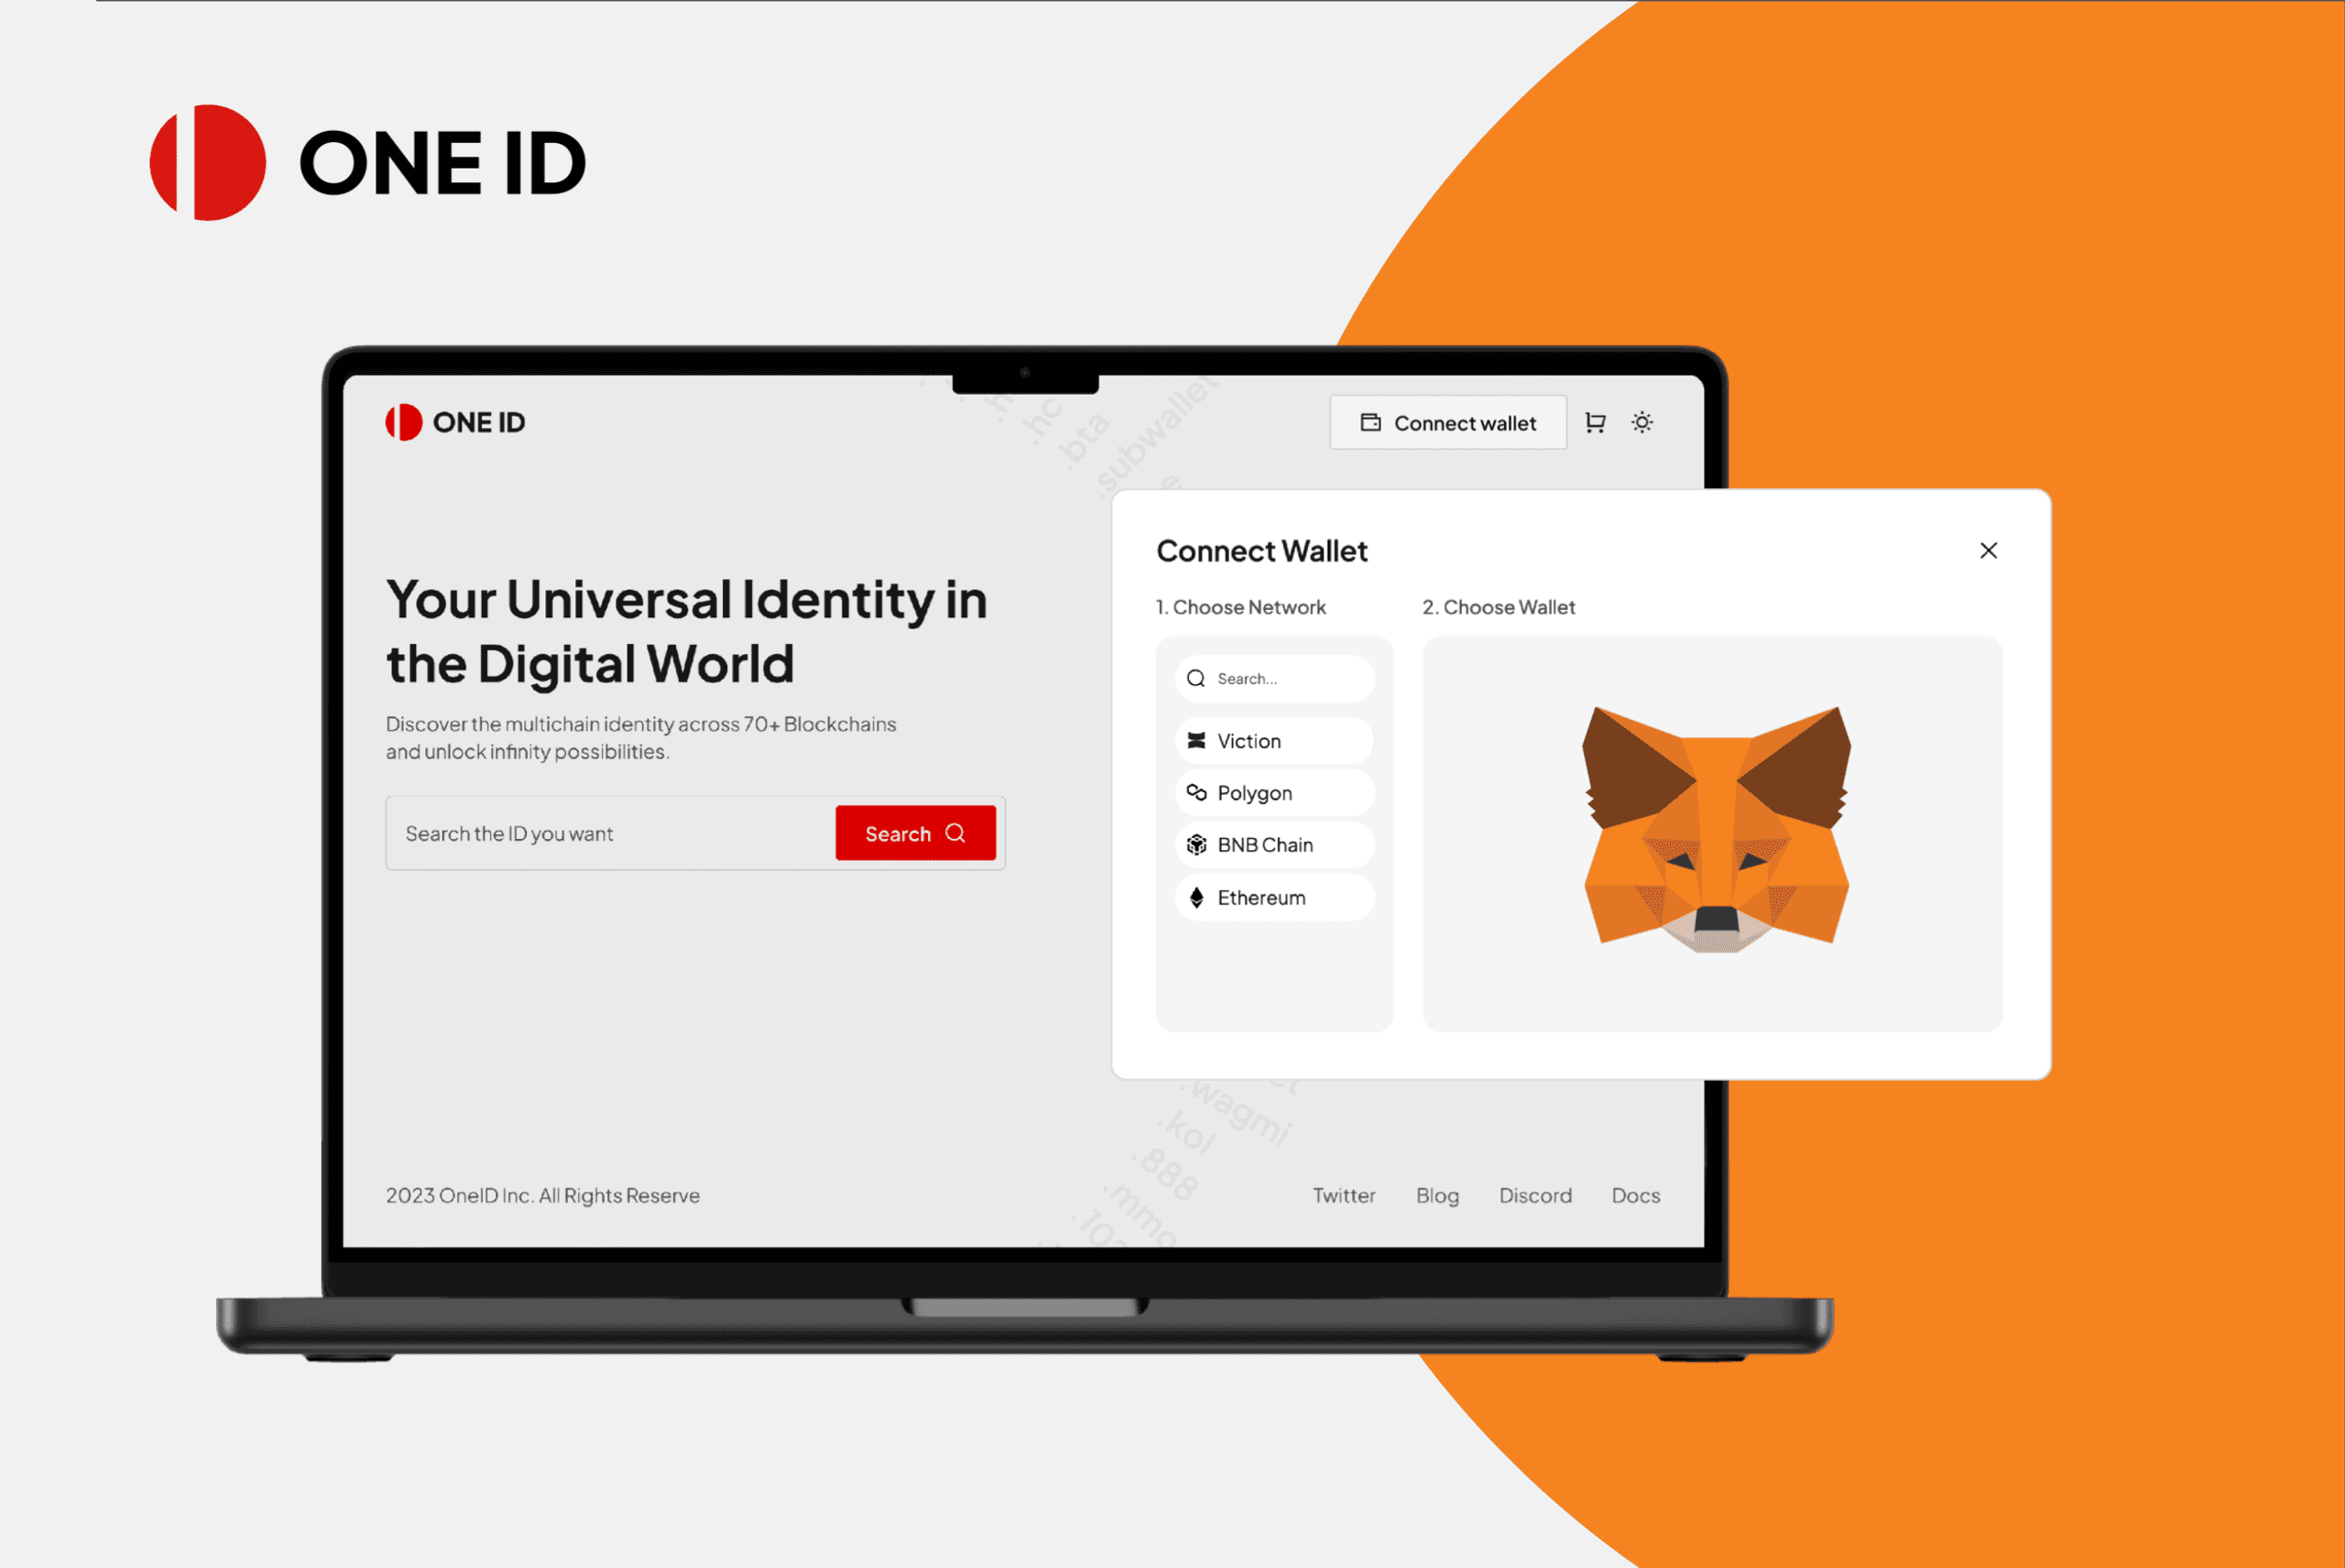 OneID Integrates MetaMask: Open Up More Options For Users To Get The Universal Identity